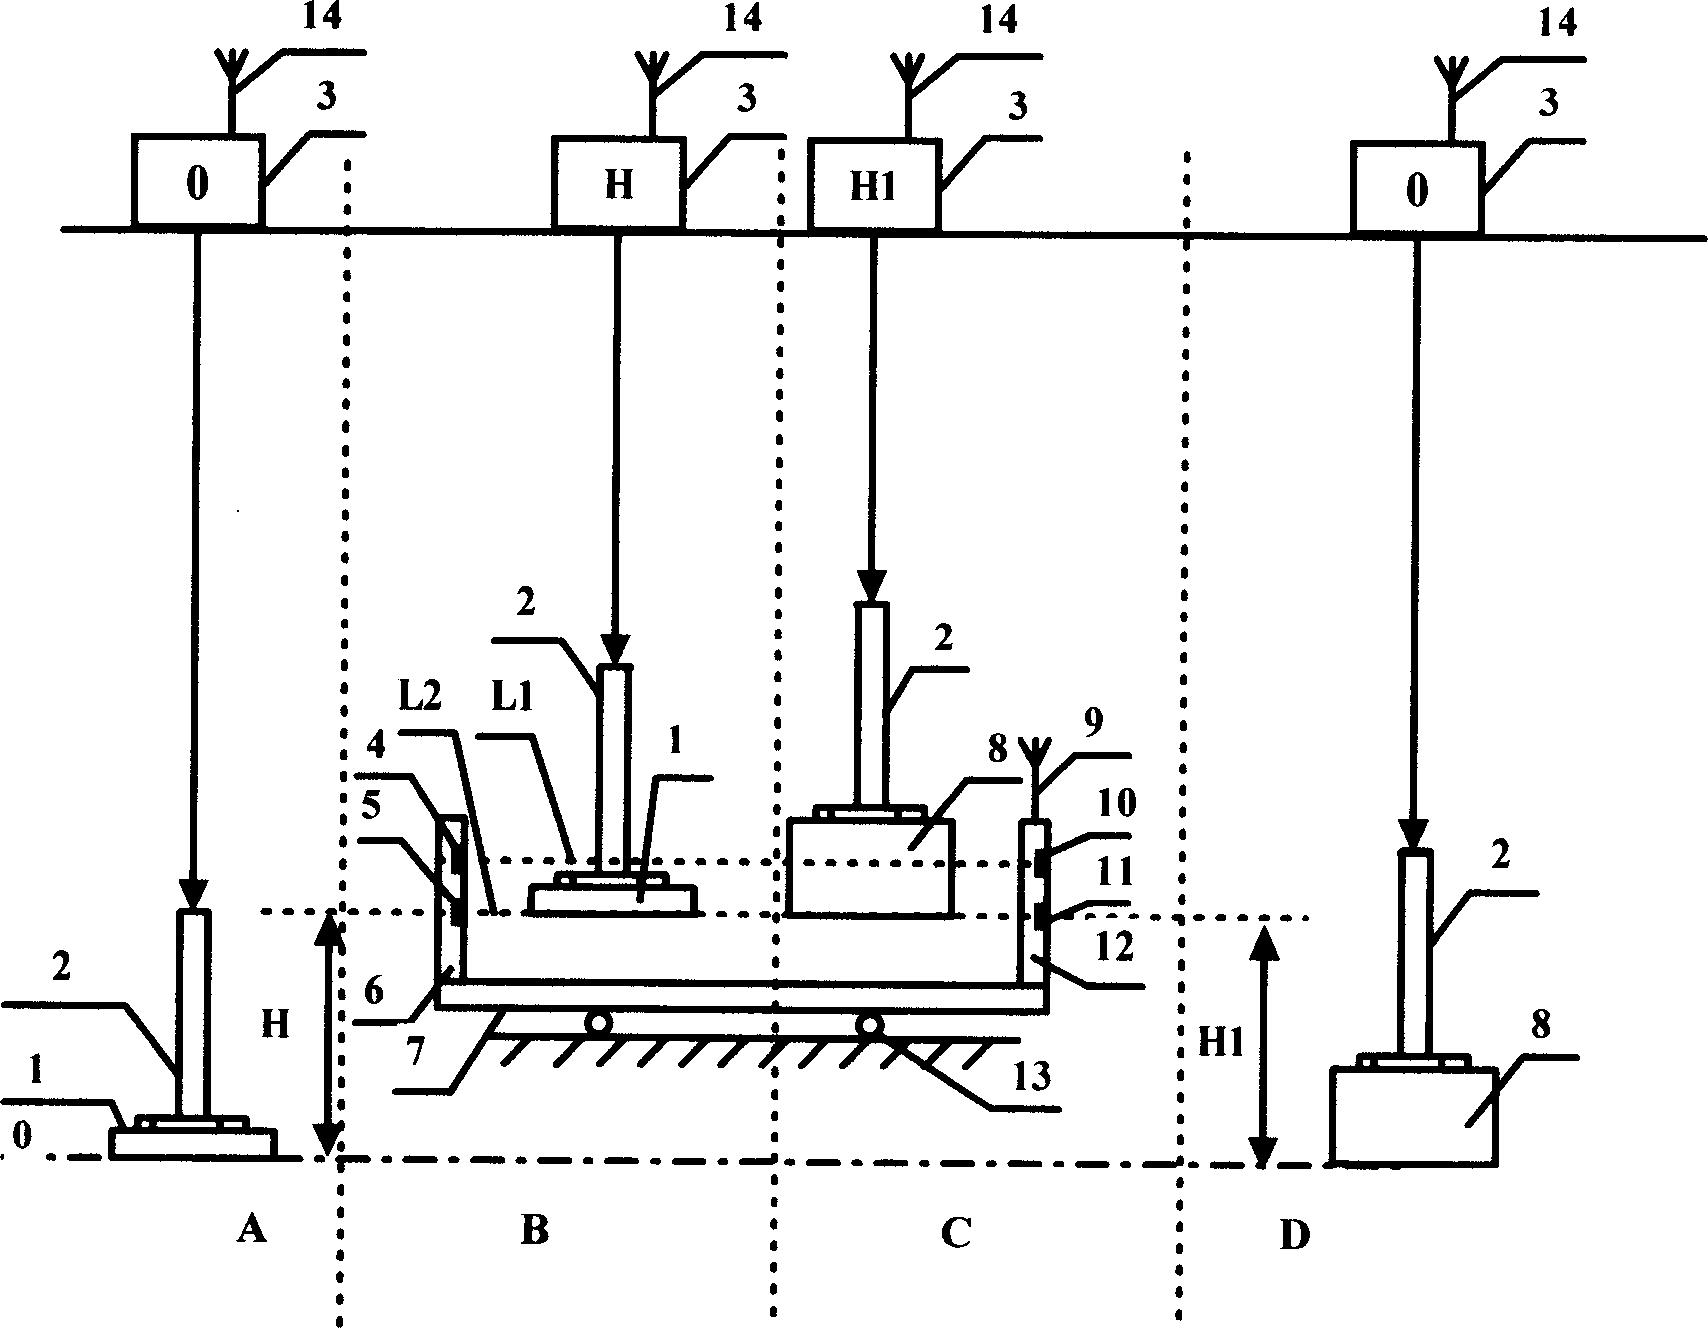 Anode horizontal height-finding system with radio comparing base as platform